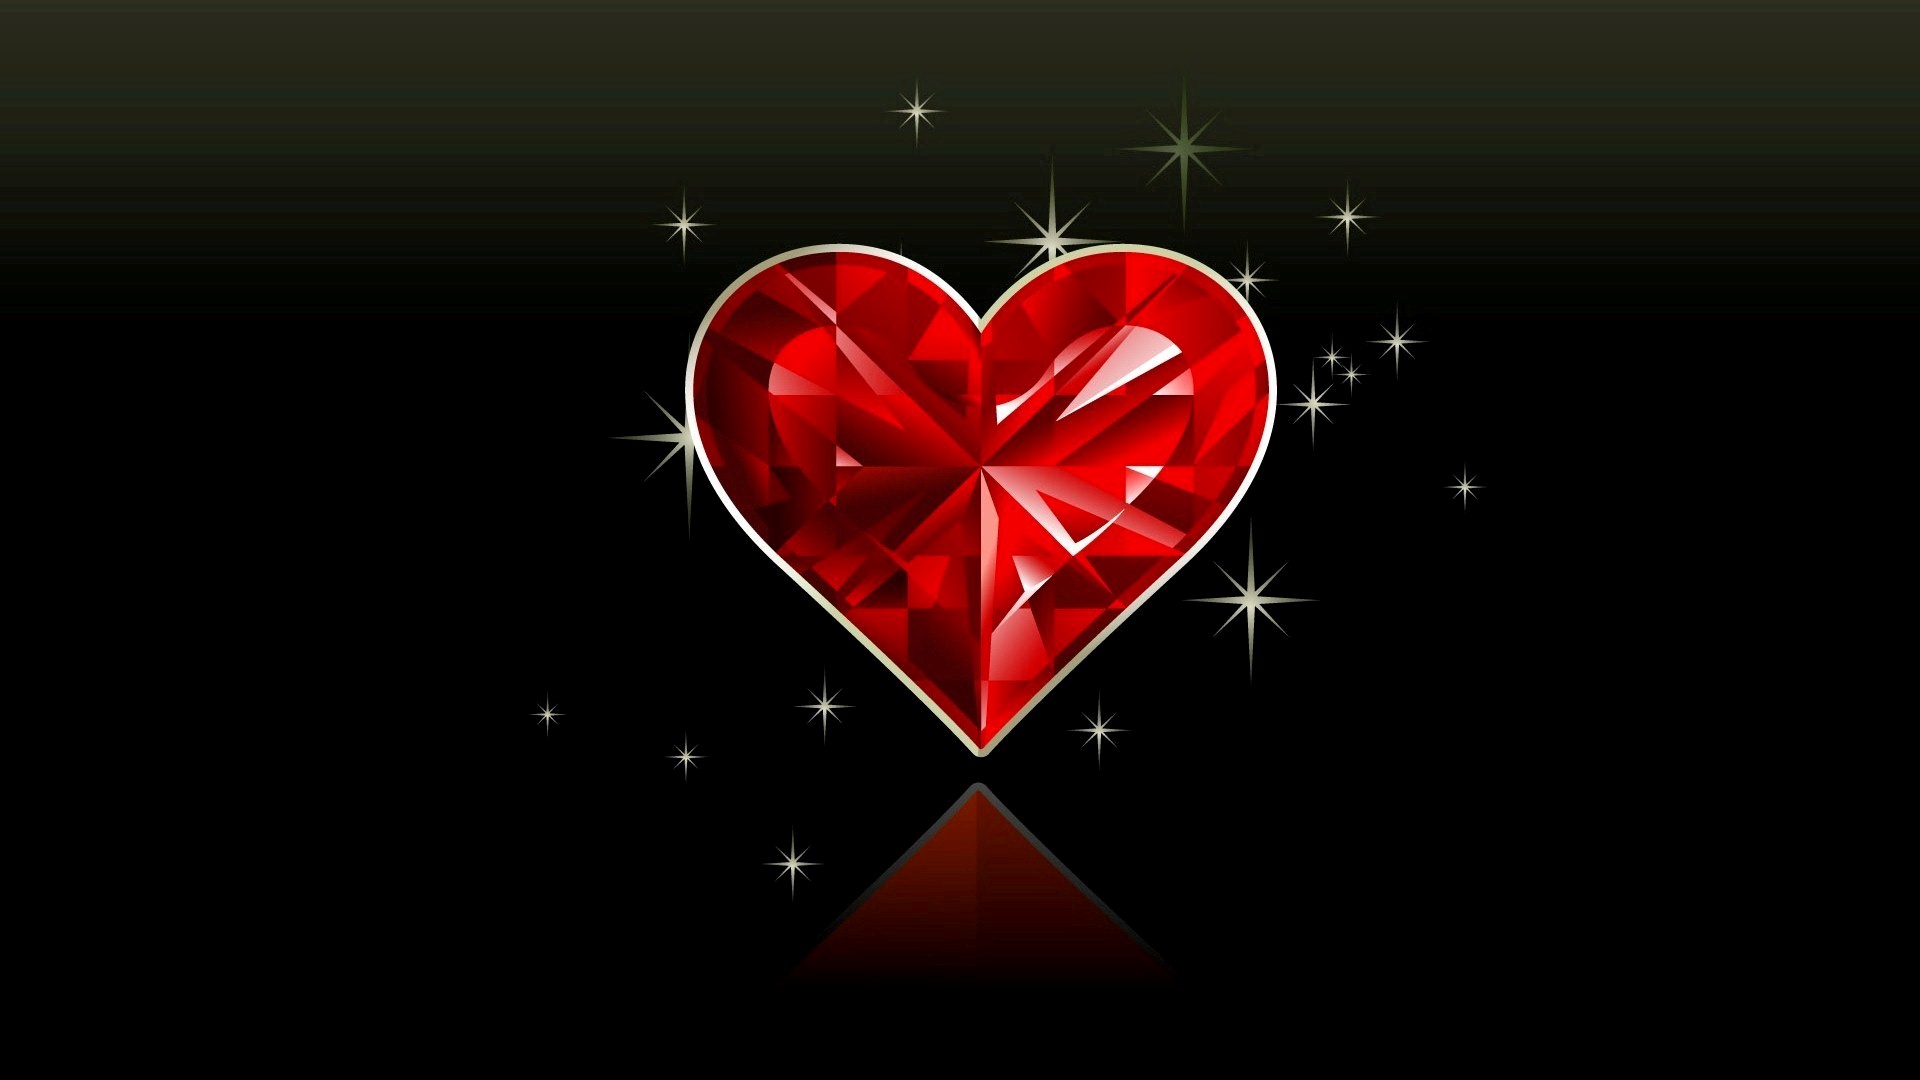 Red Crystal Heart In Black Background HD Wallpaper